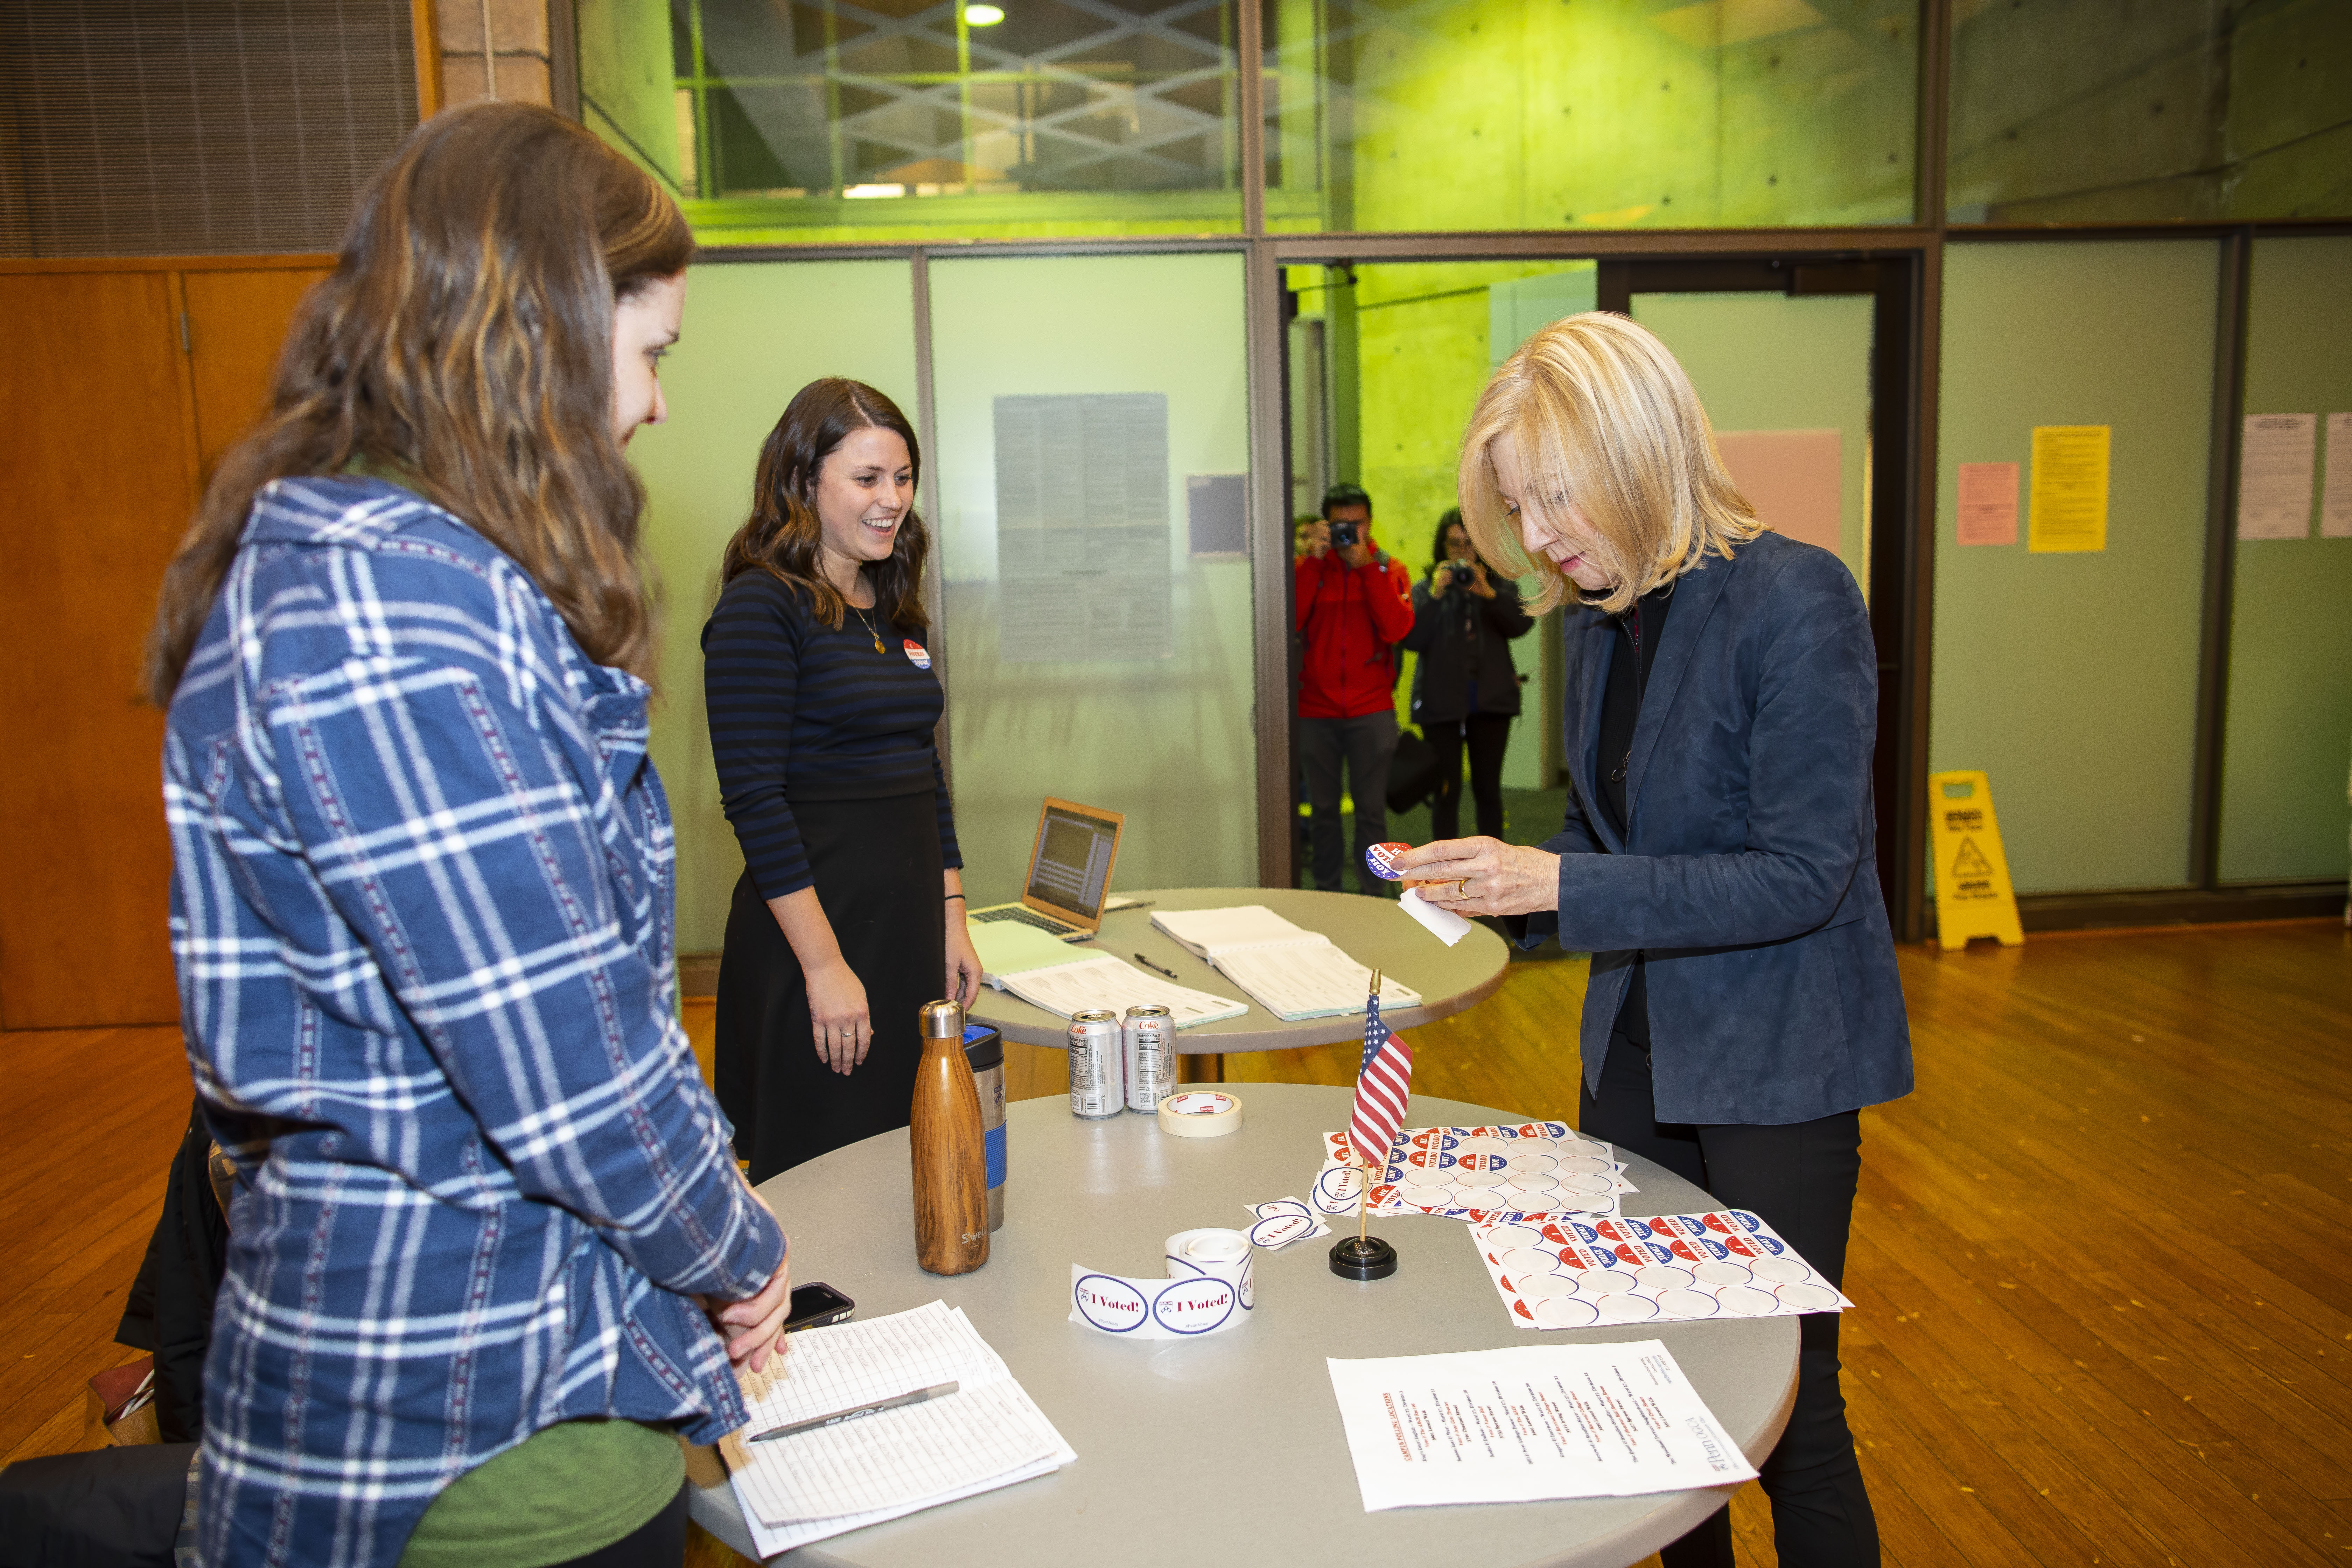 Dr. Gutmann chooses an I Voted sticker from a table in Vance Hall